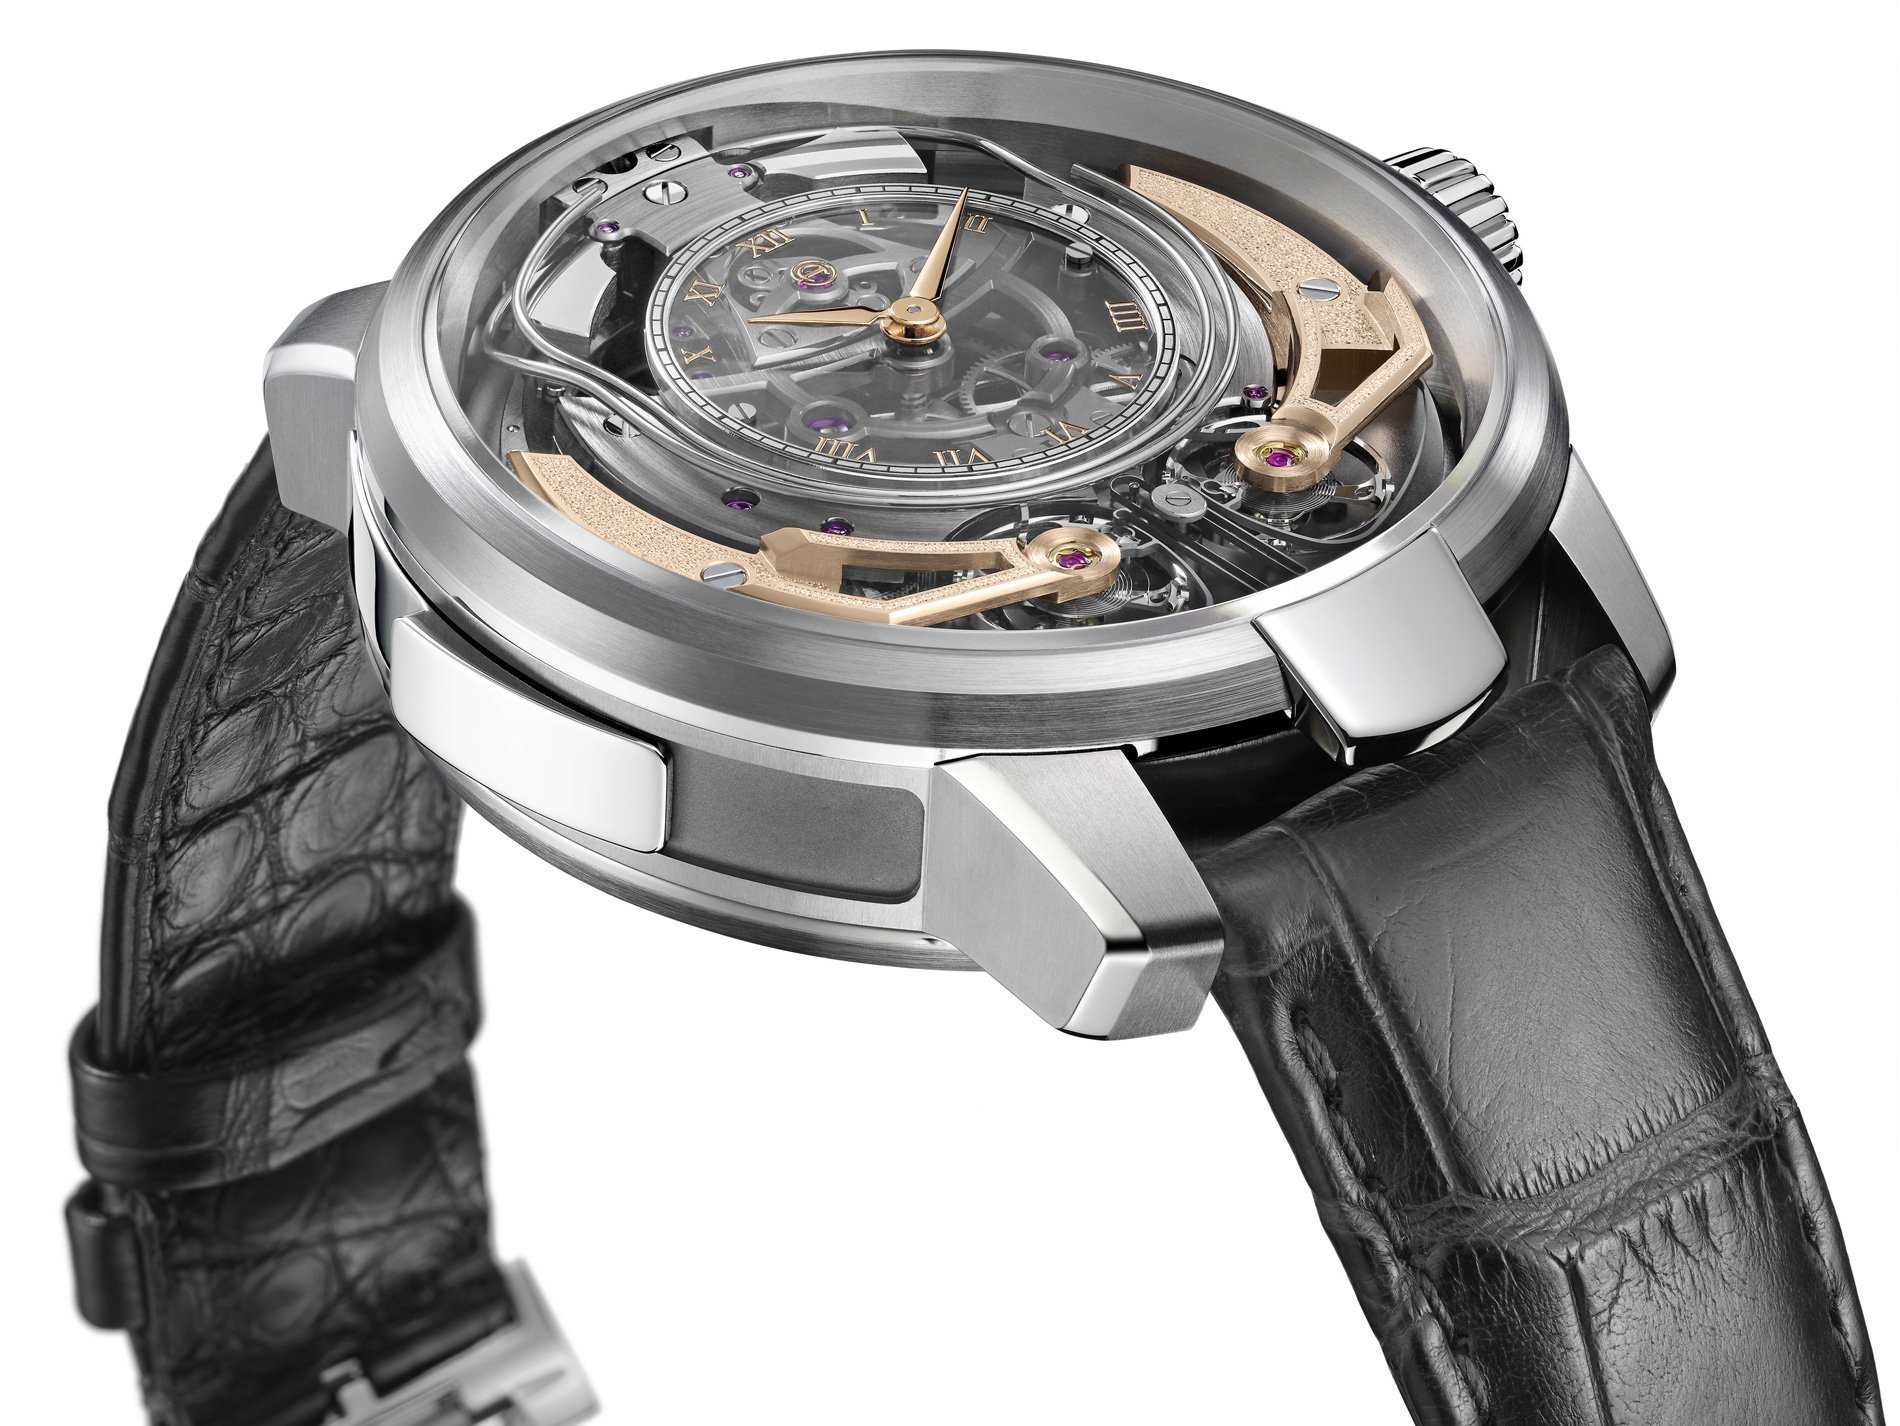 Minute Repeater Resonance: Armin Strom Masterpiece 2 is a world first two-in-one